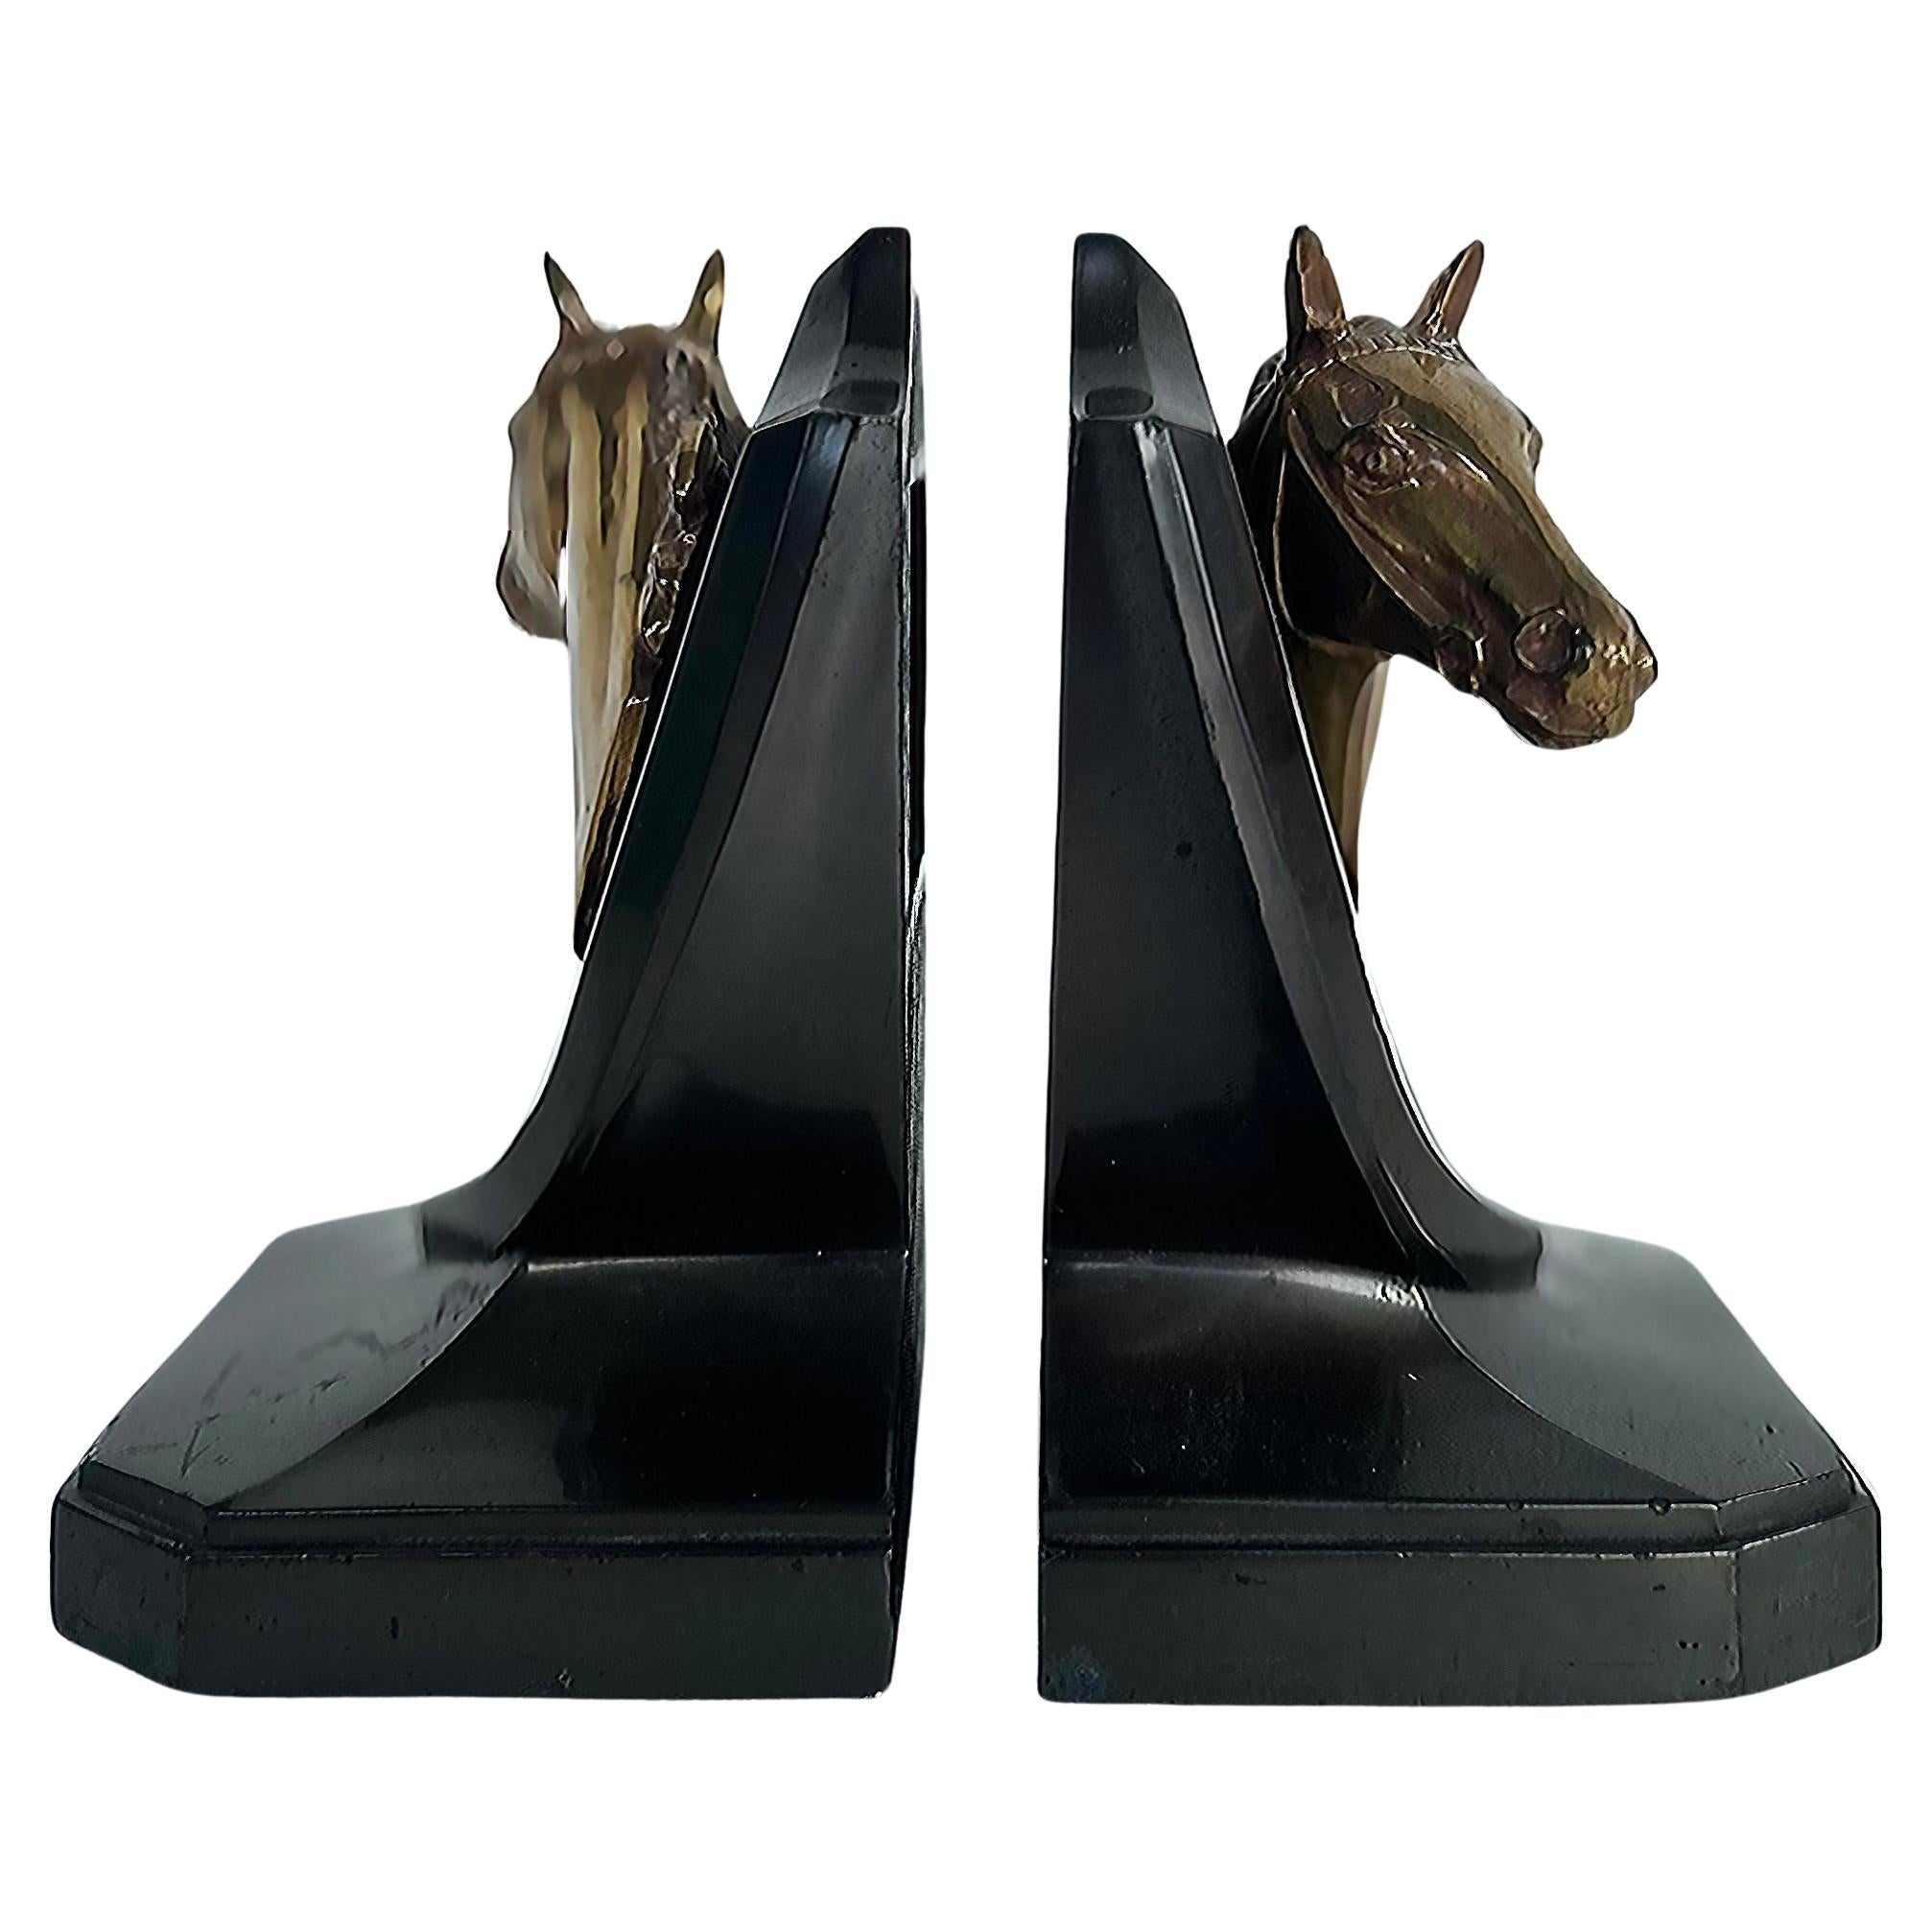 Vintage Equestrian Horse Iron, Brass Trophy Bookends Stamped P.M.C, Pair

Offered for sale is a pair of equestrian-themed iron and brass trophy bookends stamped P.M.C. . Each bookend features a gold-tone horse's head mounted on a black shield rising